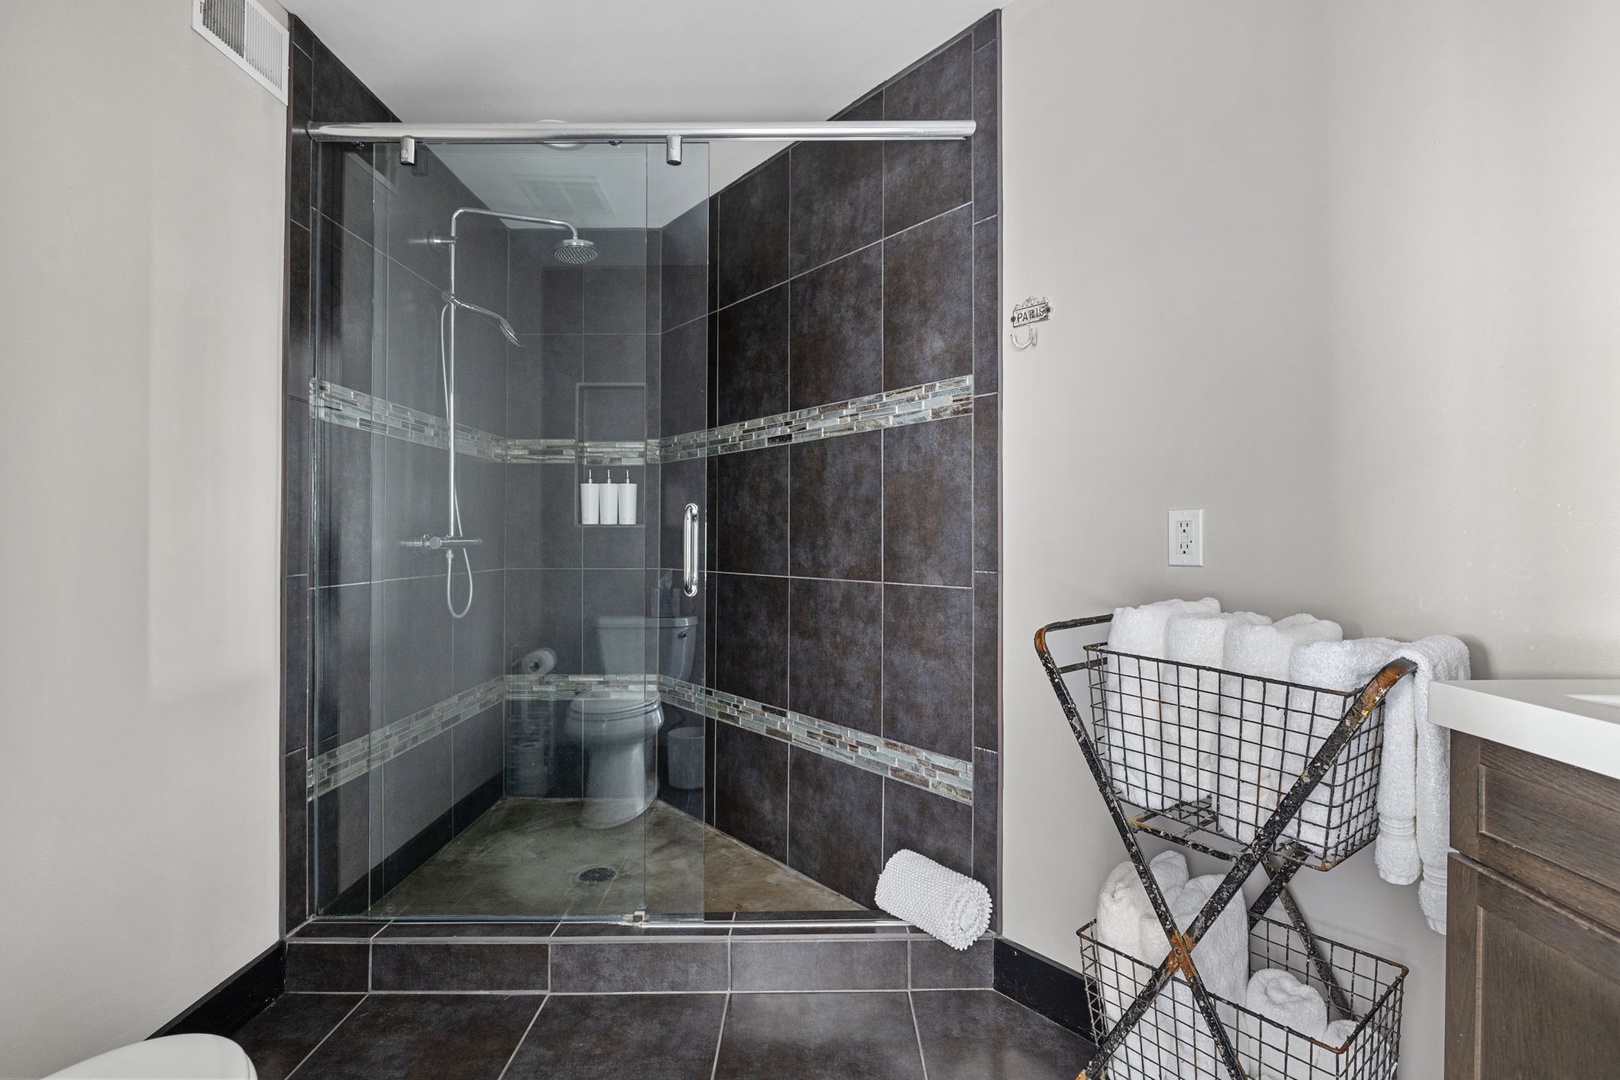 Richly appointed, this elegant bathroom is enhanced by a tiled walk-in shower.